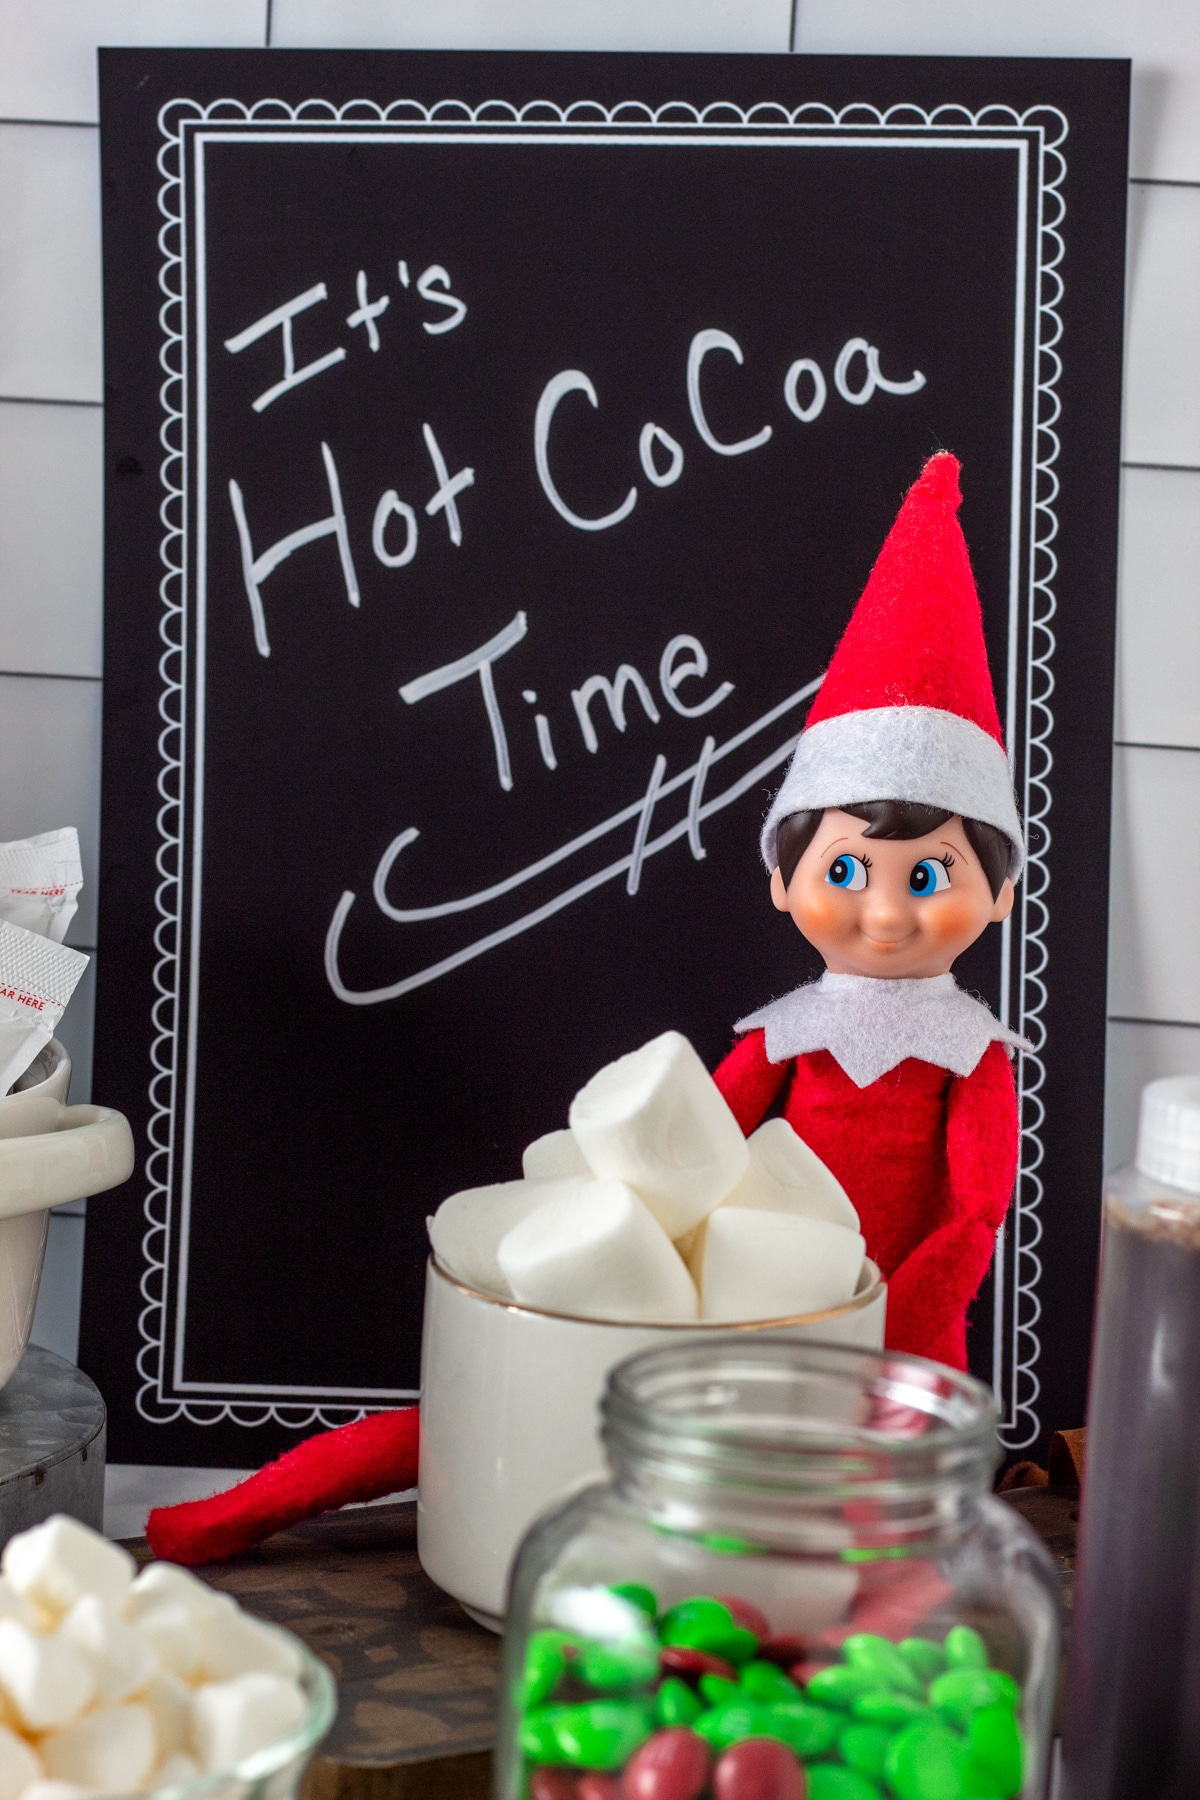 various hot cocoa bar items on kitchen counter with Elf on the Shelf and "It's Hot Cocoa Time" sign